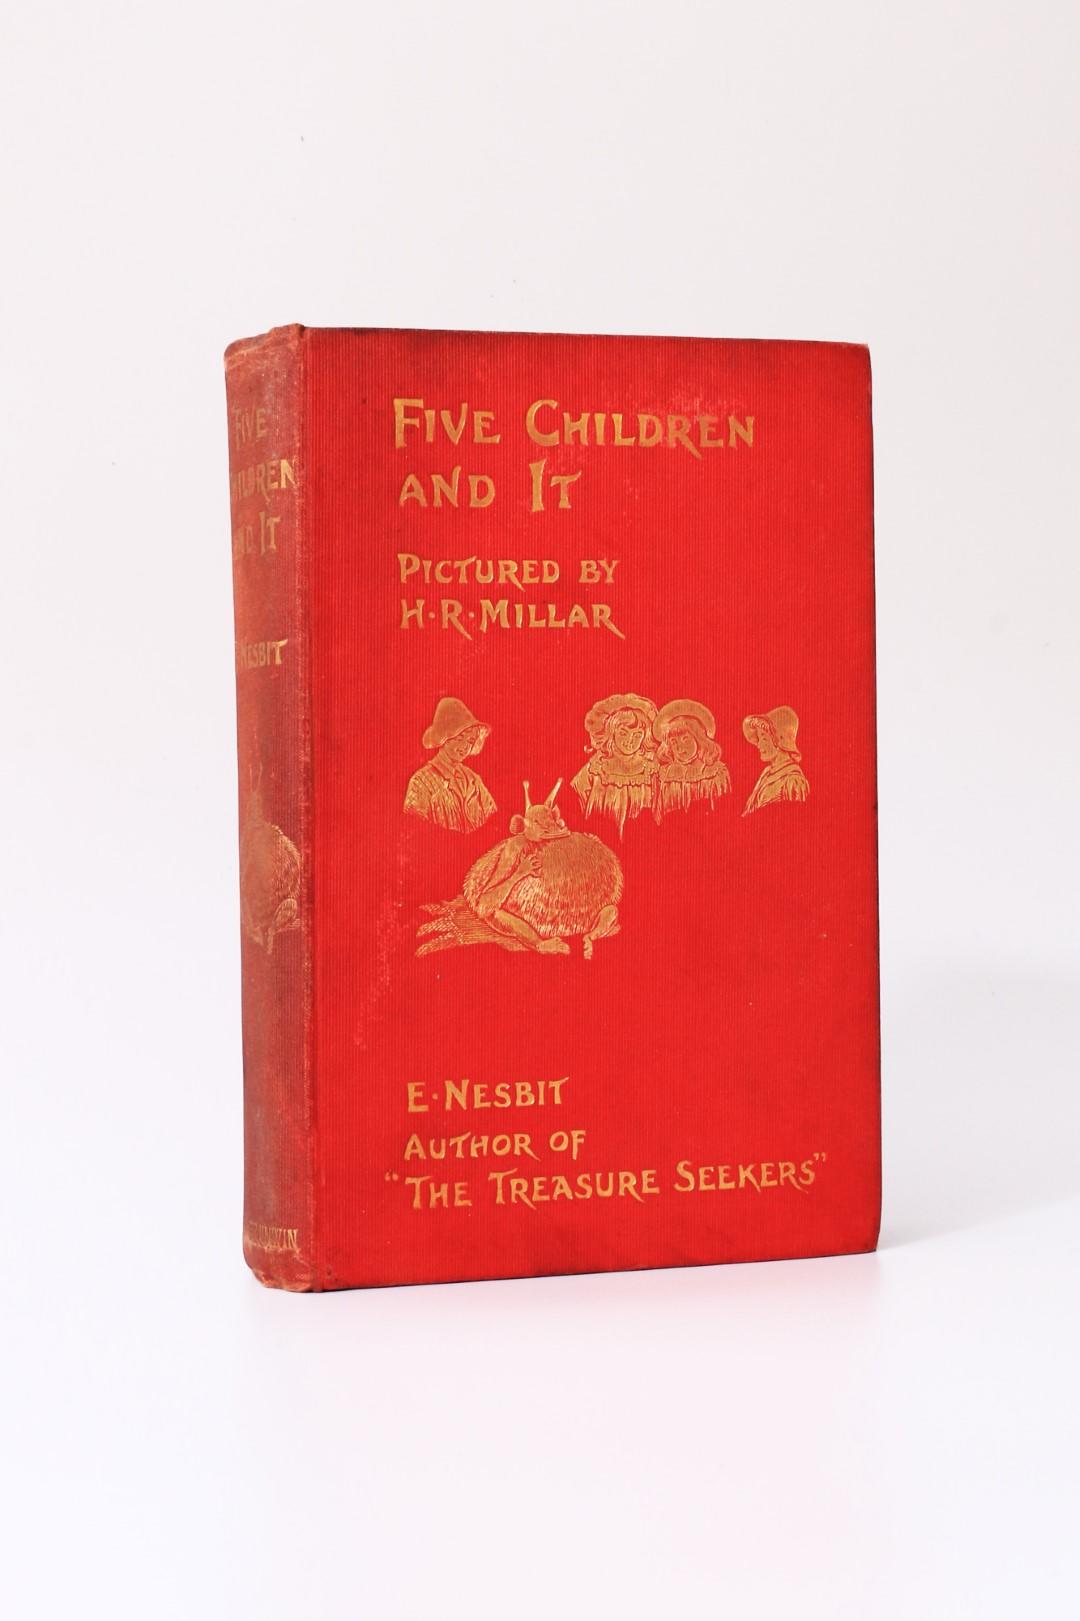 Edith Nesbit - Five Children and It - T. Fisher Unwin, 1902, First Edition.